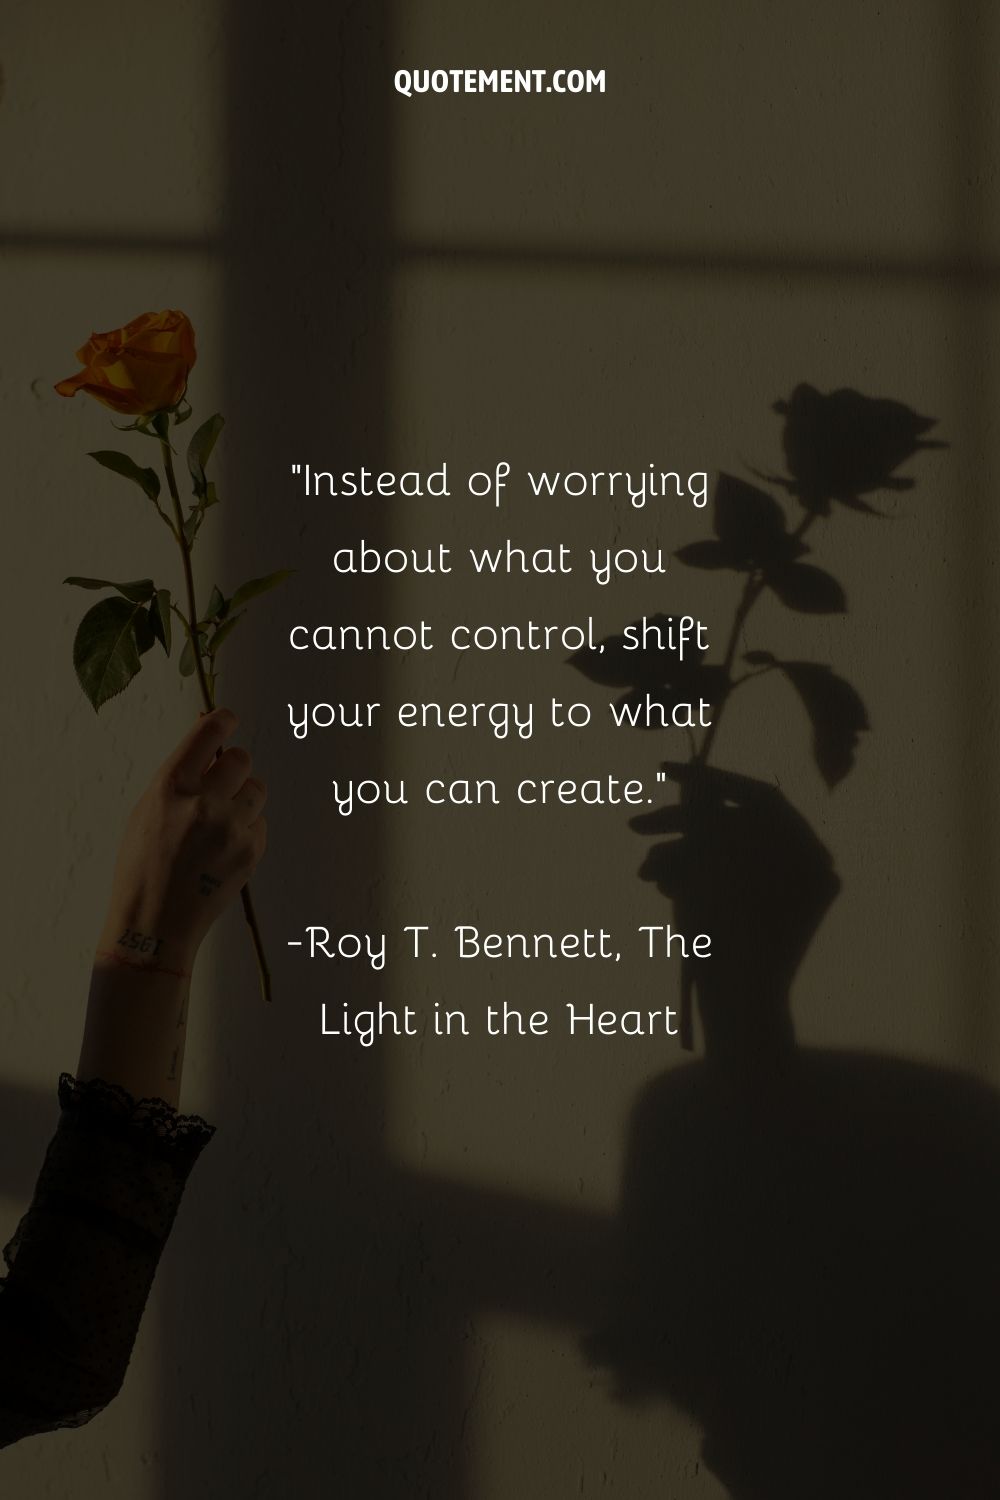 Instead of worrying about what you cannot control, shift your energy to what you can create.